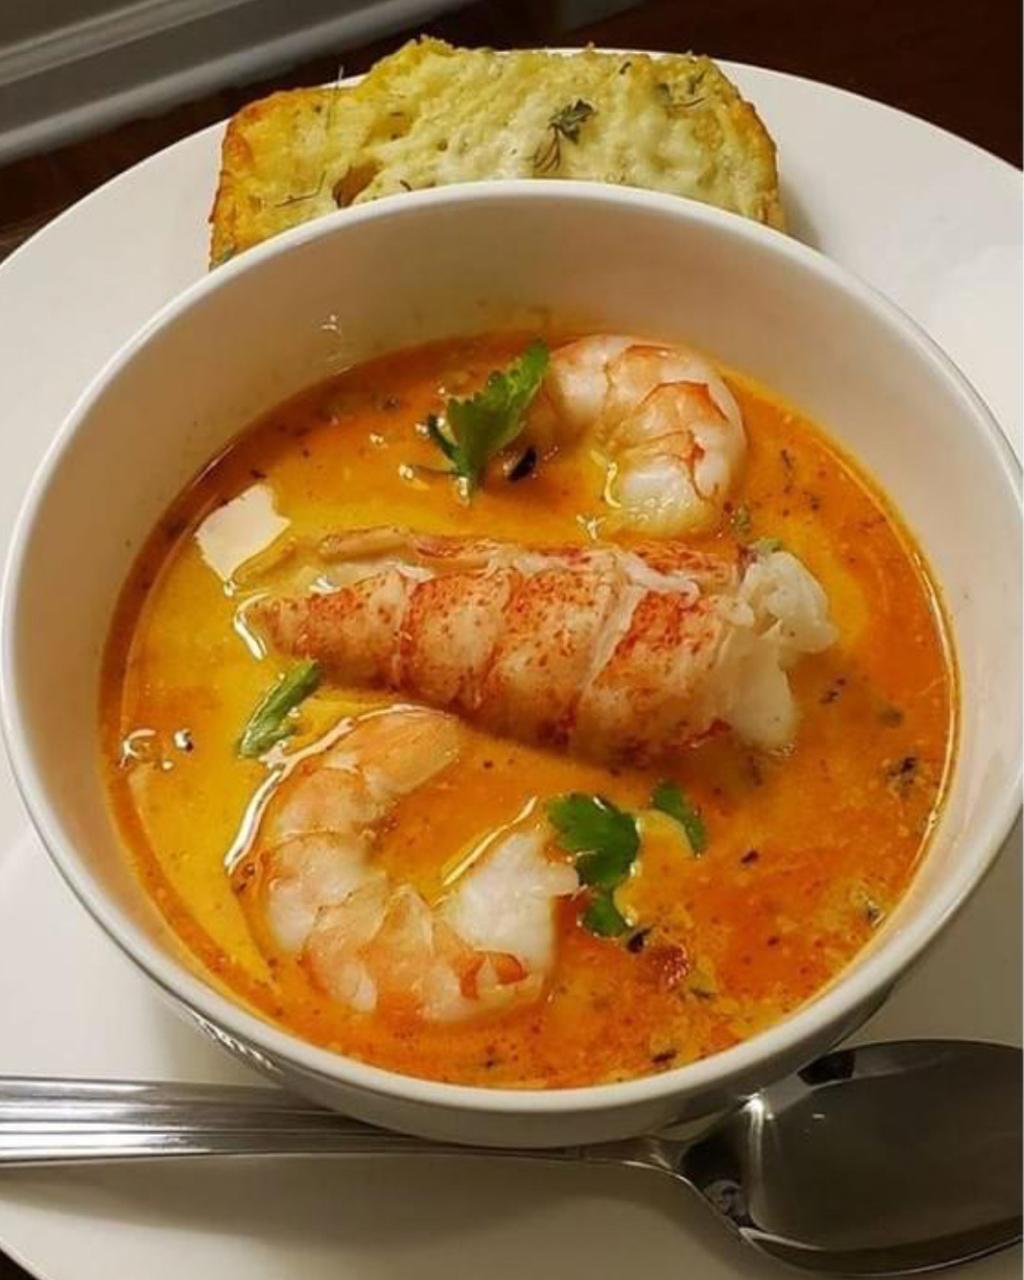 Seafood Bisque with Crab, Shrimp, and Lobster